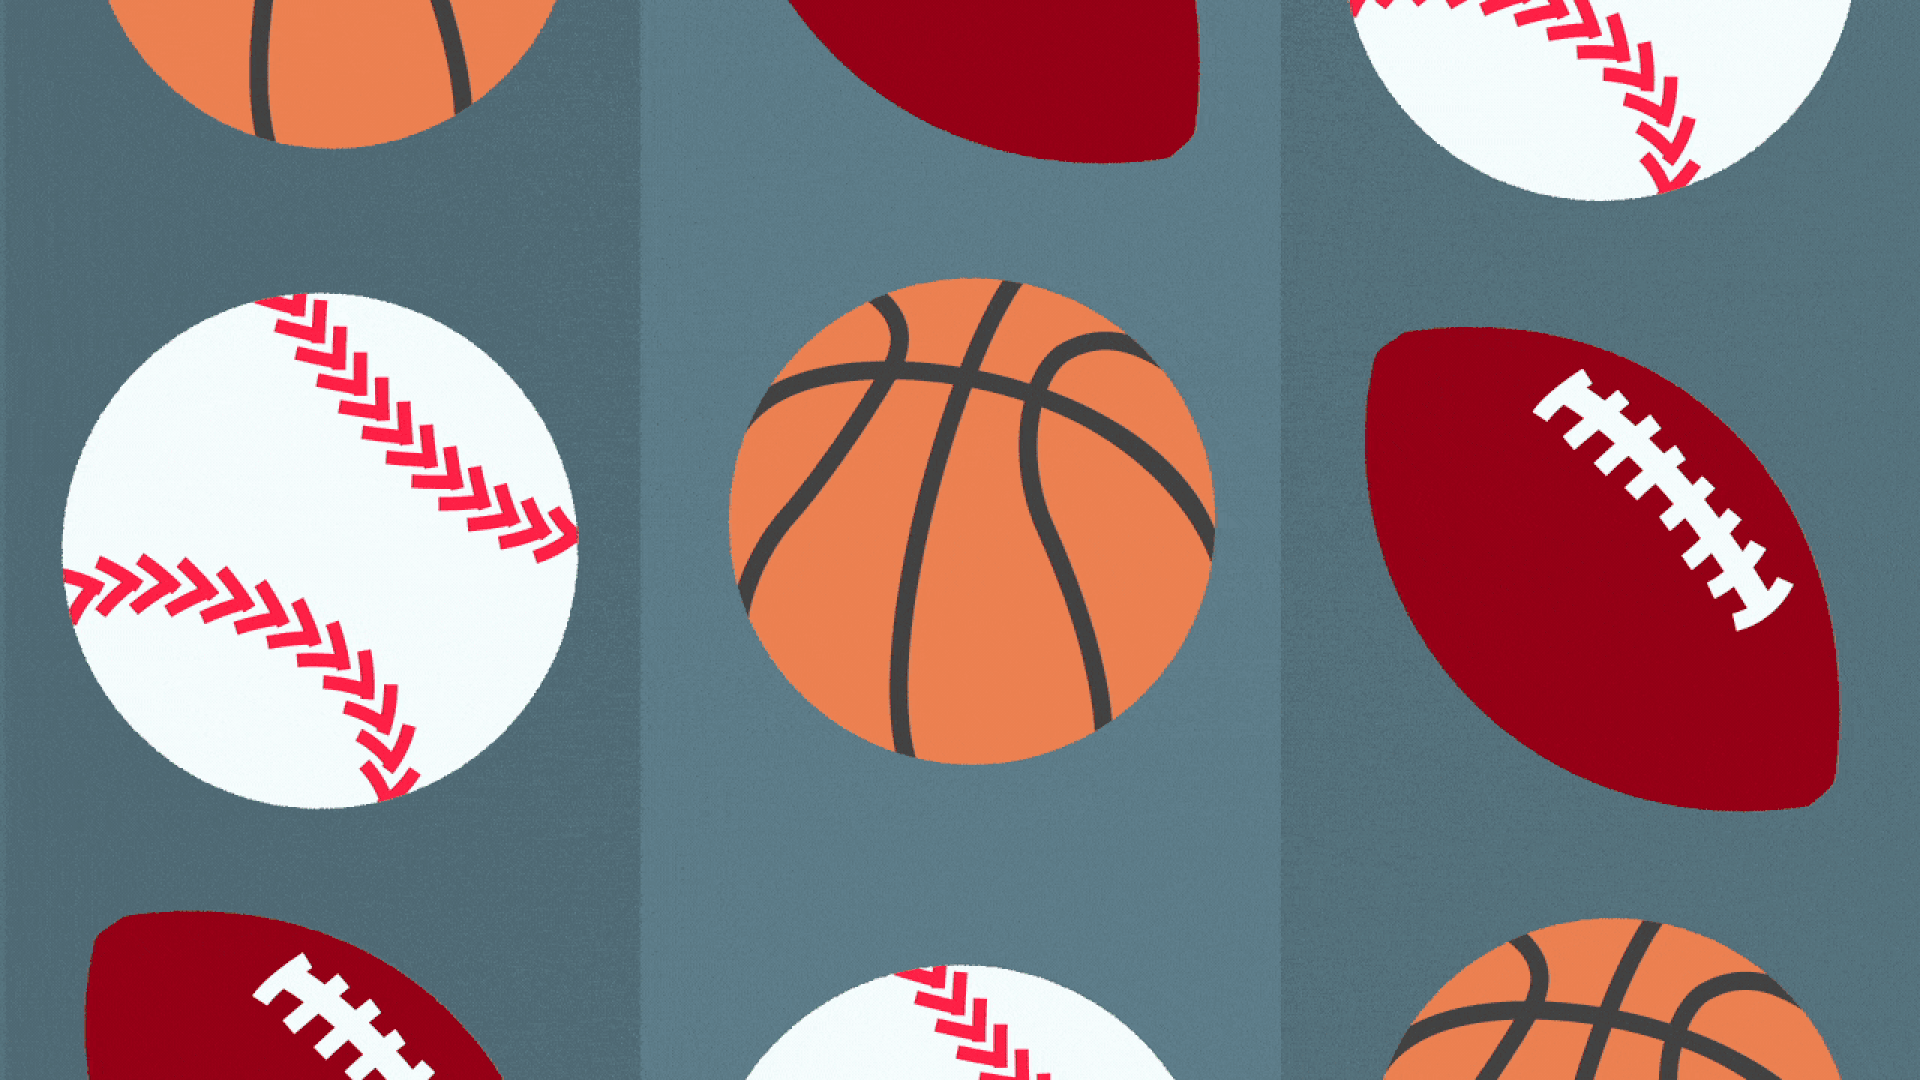 Illustration of a basketball, baseball and football slot machine ending with three dollar signs.